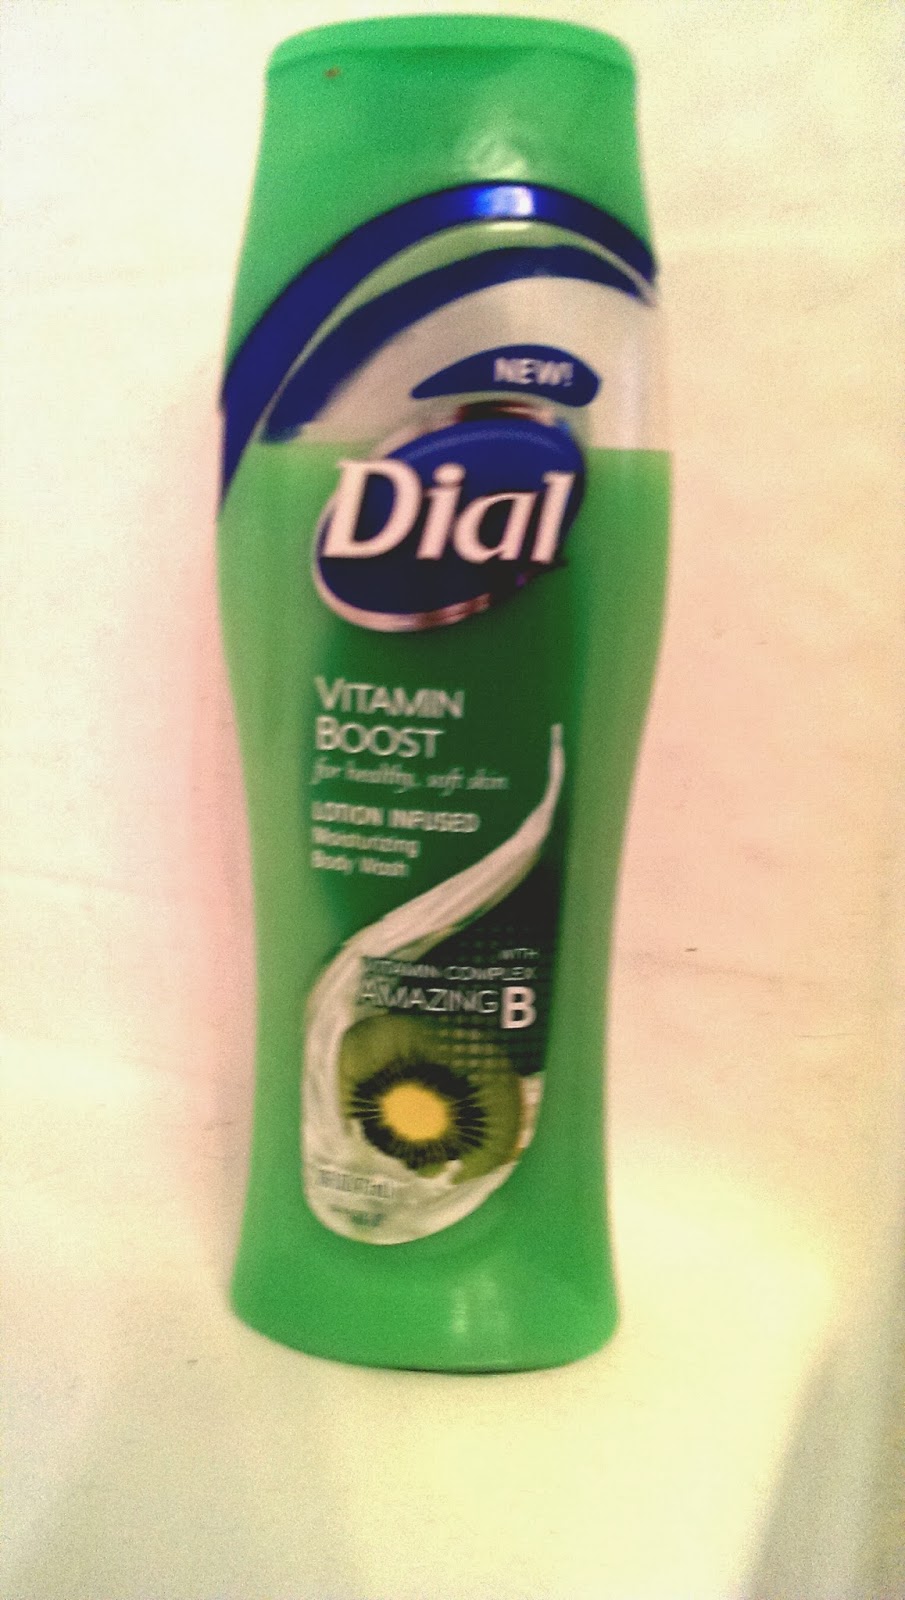 Dial+Body+Wash Dial Vitamin Boost Body Wash Review - Dial Body Wash Giveaway